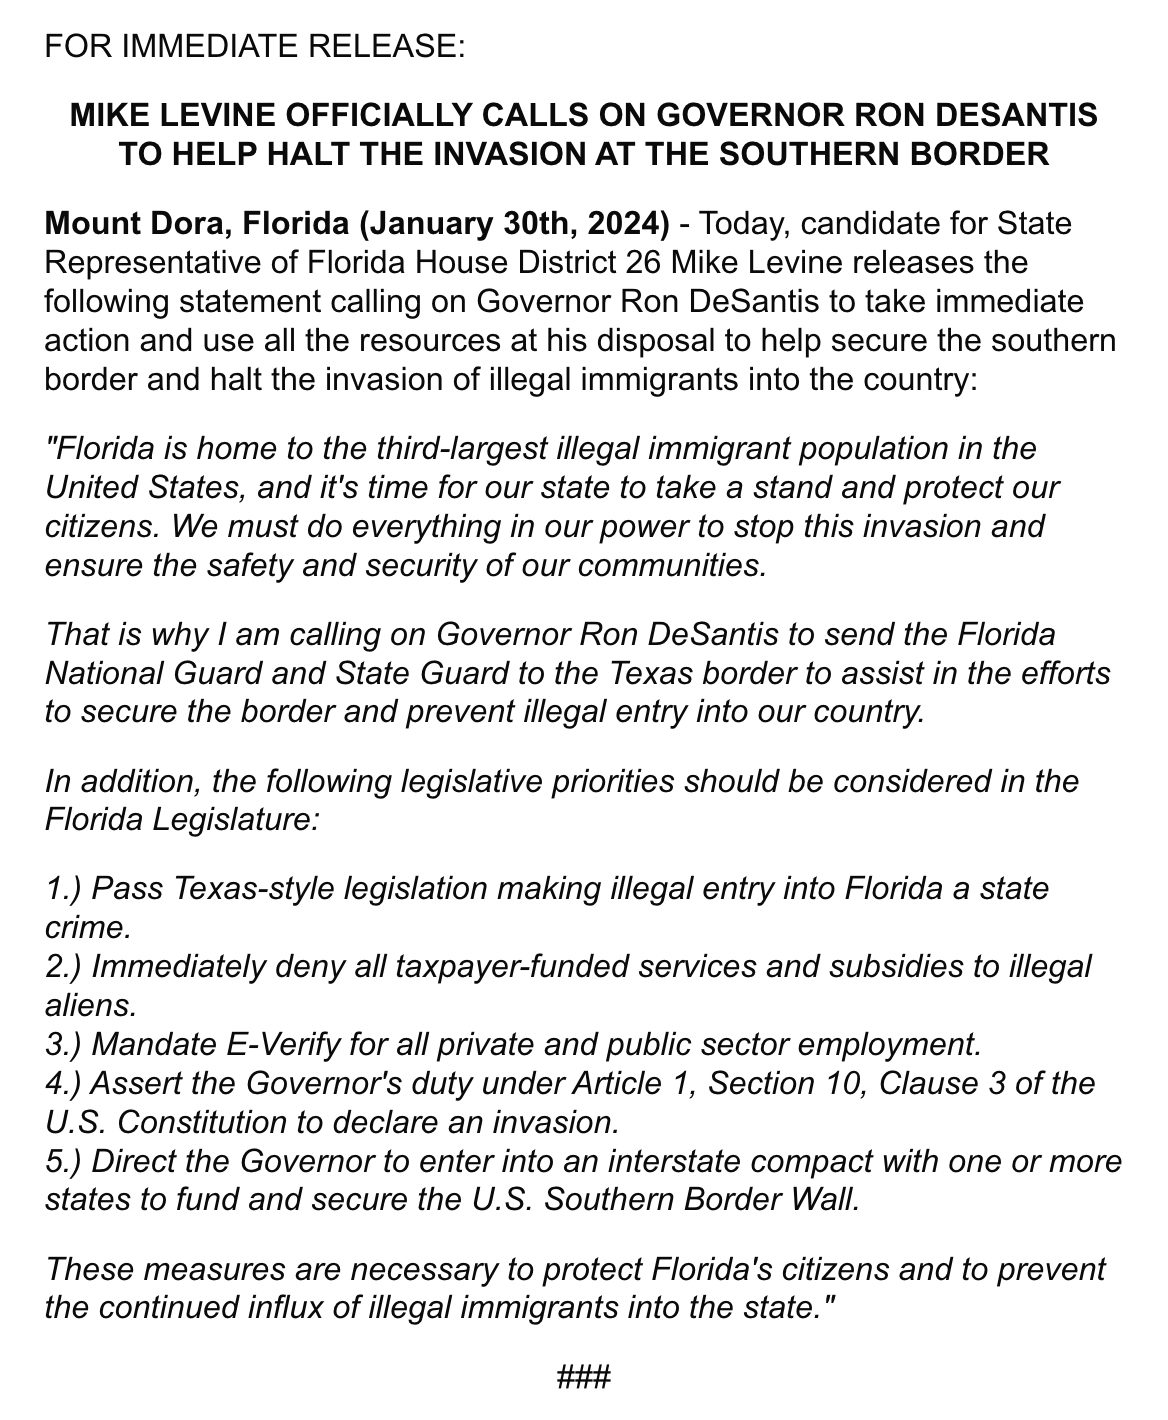 Mike Levine Calls On Governor DeSantis To Help Halt The Invasion At The Southern Border